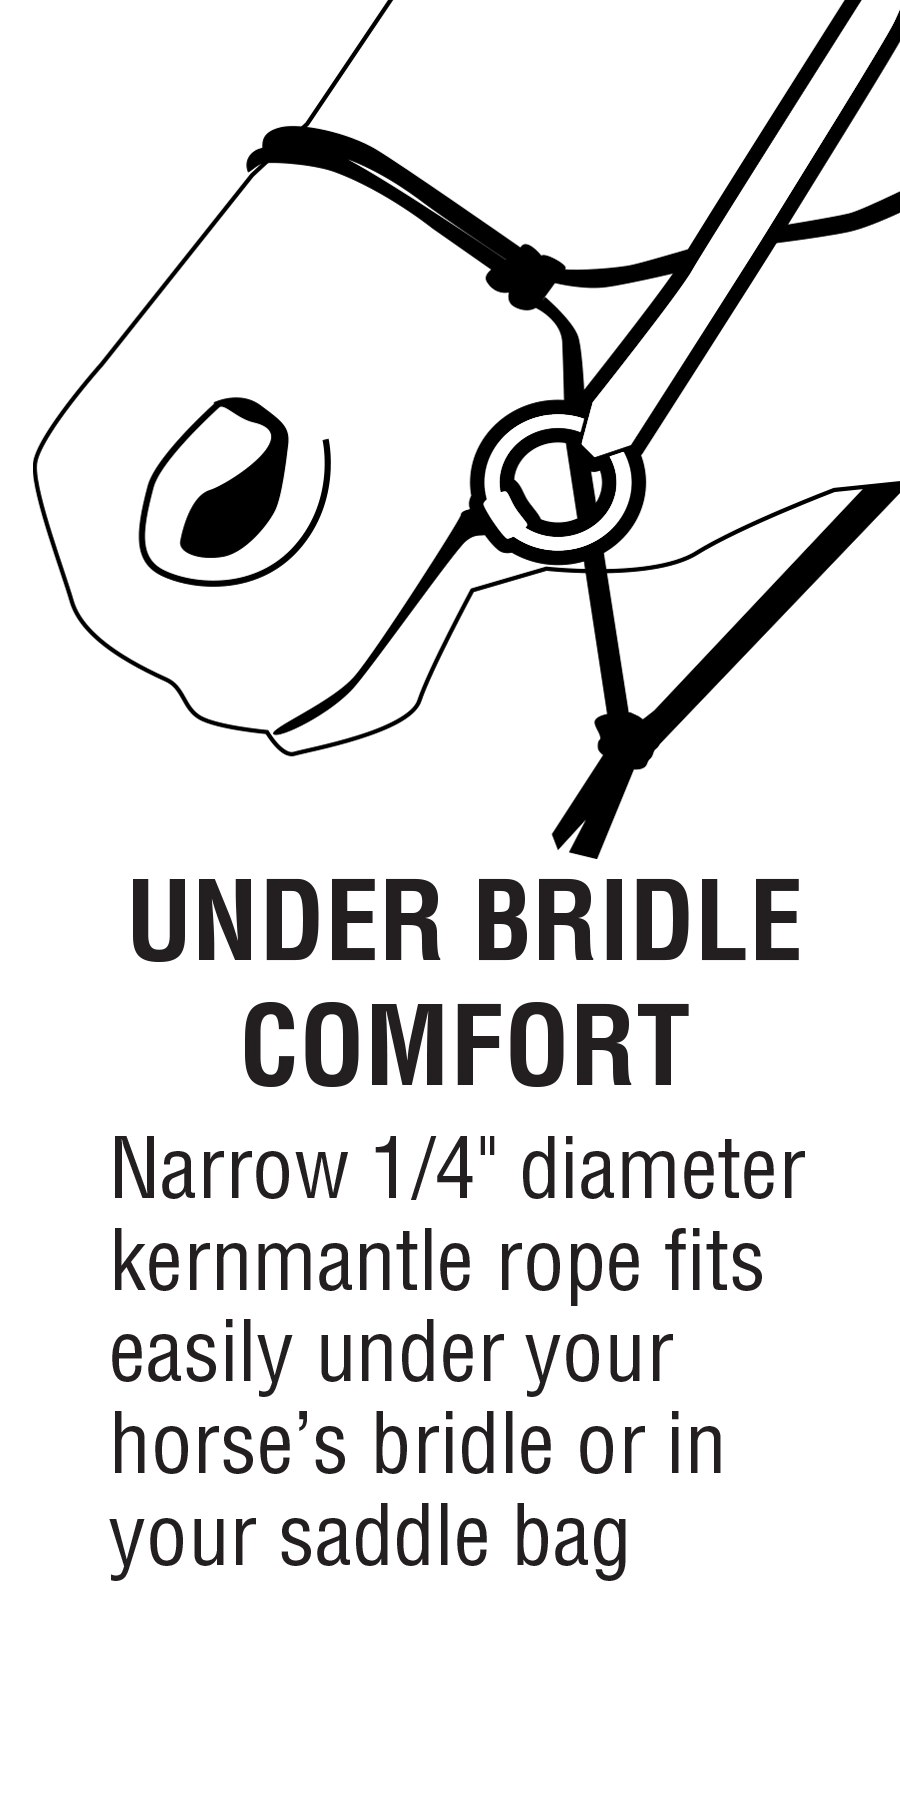 Narrow 1/4 inch diameter kernmantle rope fits easily under your horse’s bridle or in your saddle bag